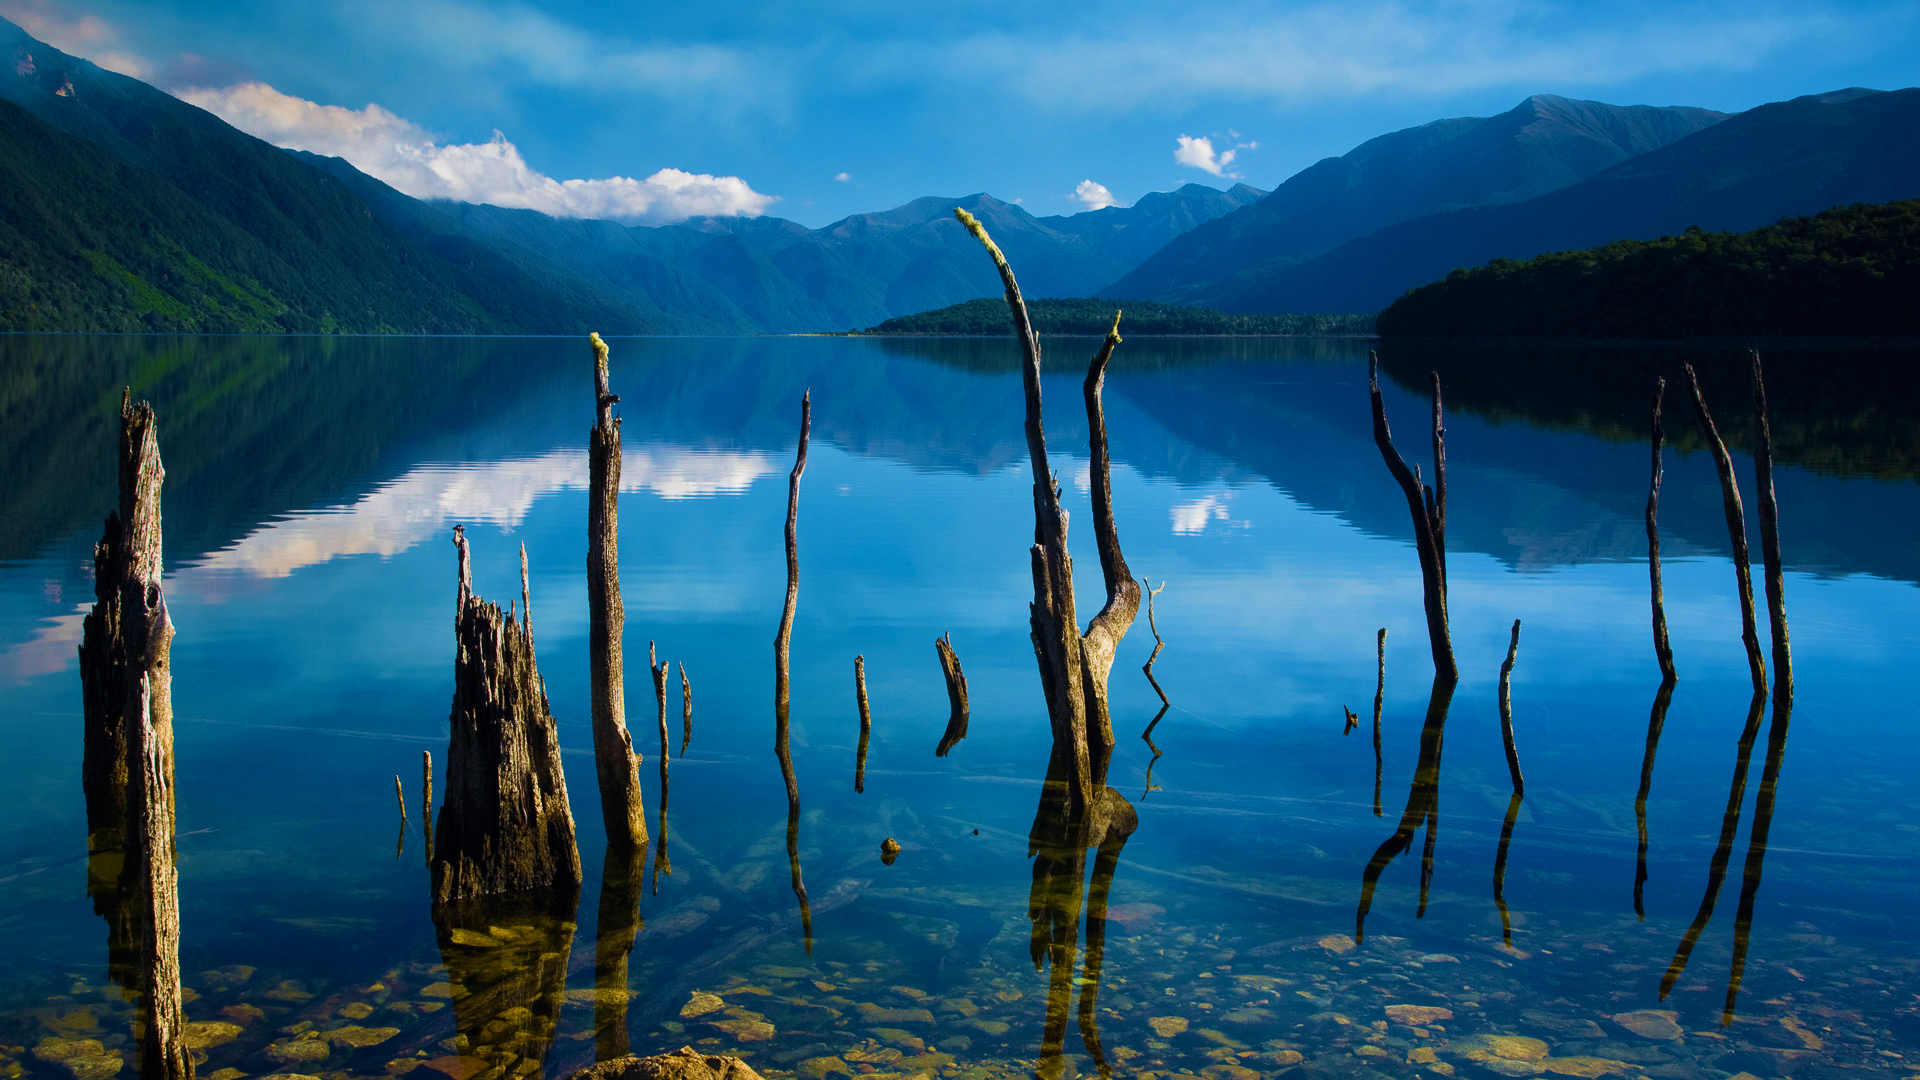 General 1920x1080 landscape nature lake wood water ripples mountains clouds sky rocks trees forest Lake Monowai New Zealand